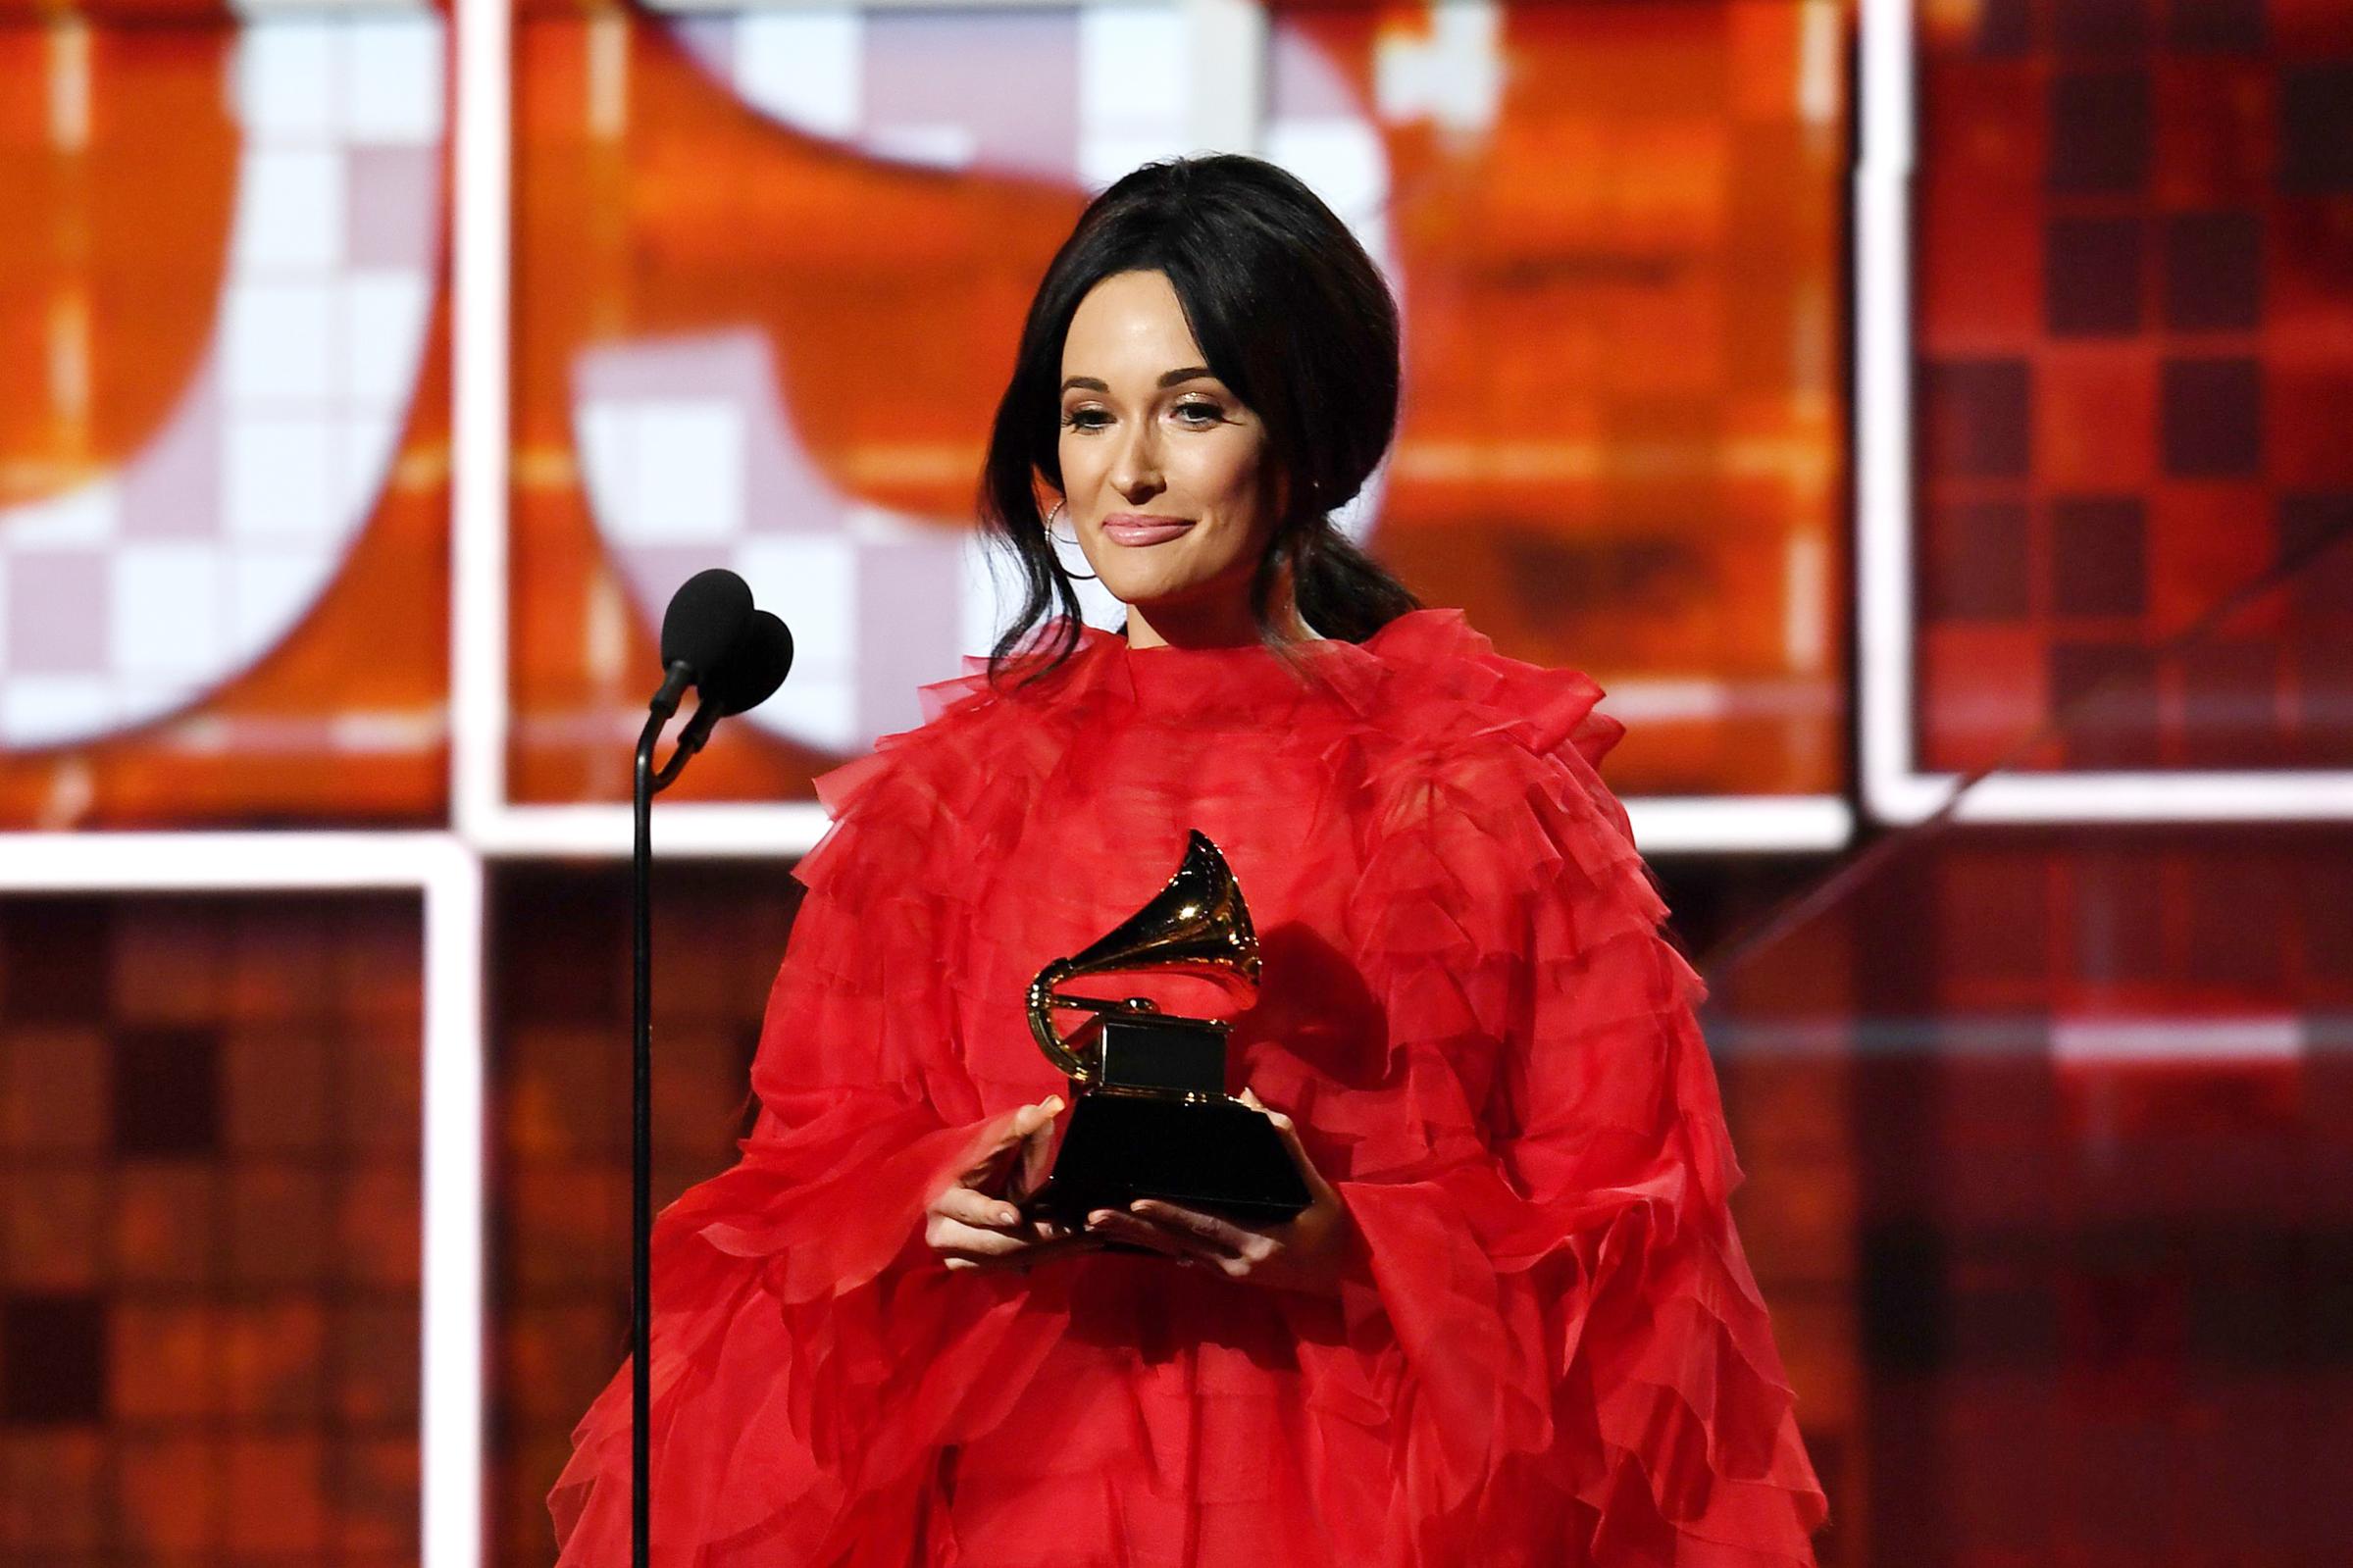 Grammys 2019: See All the Winners | TIME